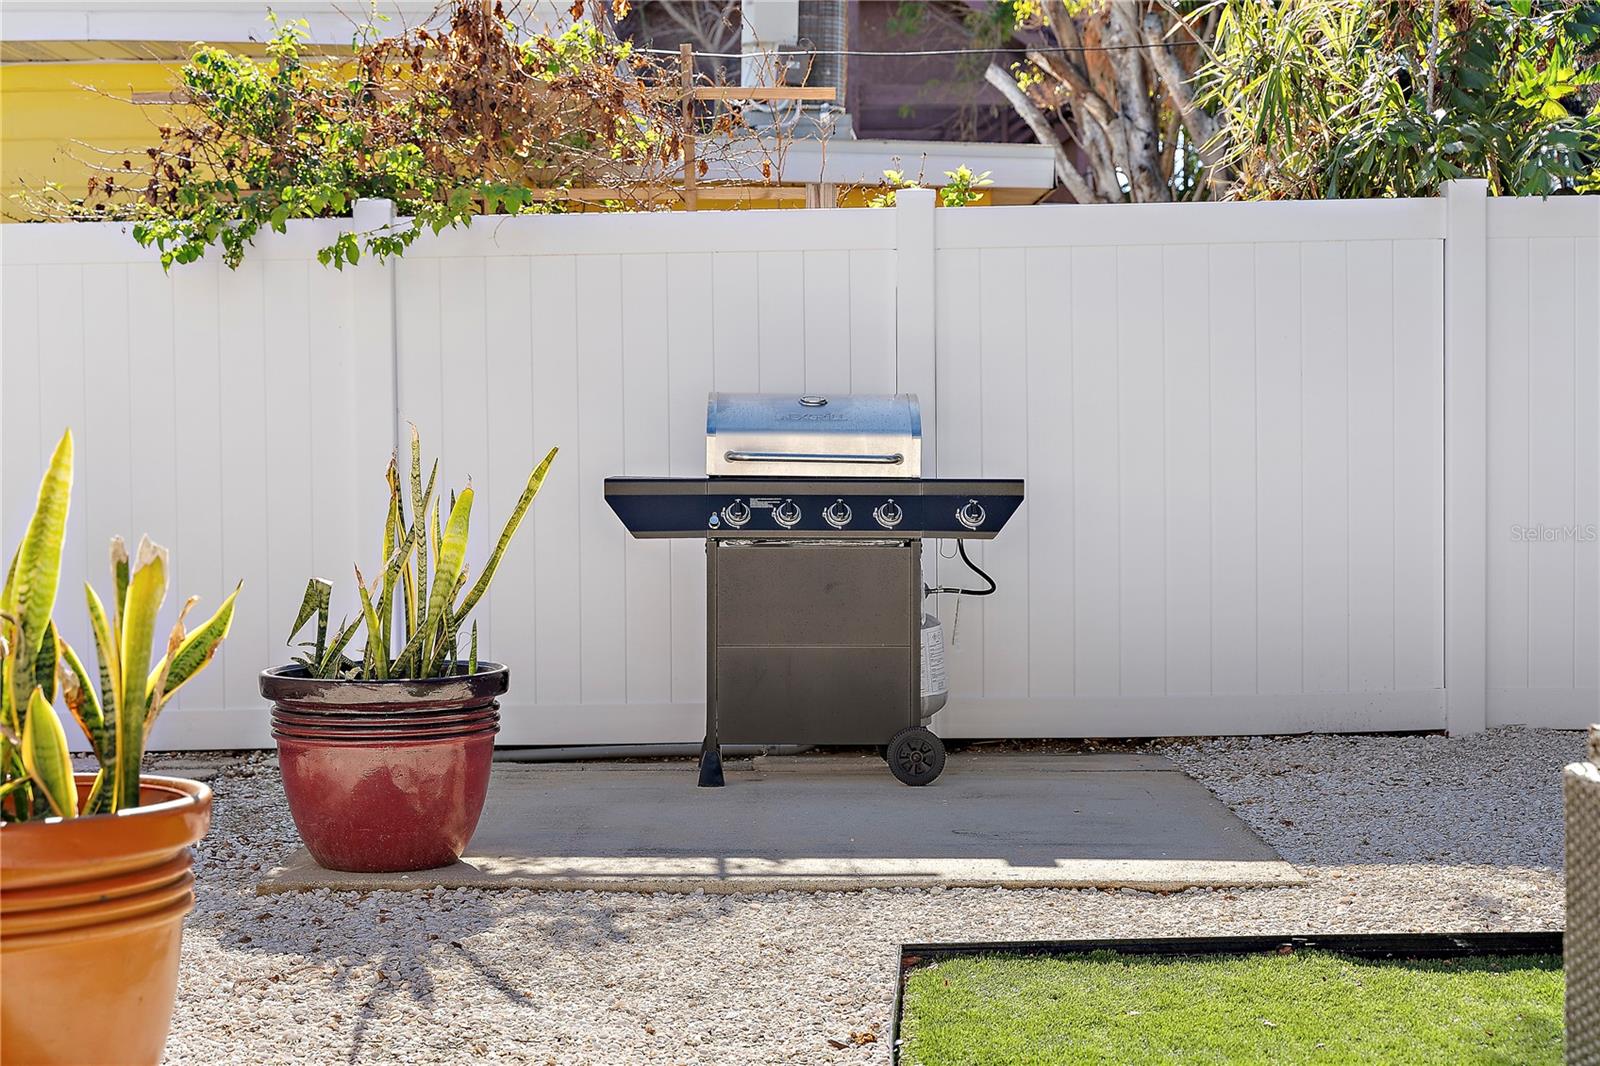 The home comes with a stainless steel outdoor grill.